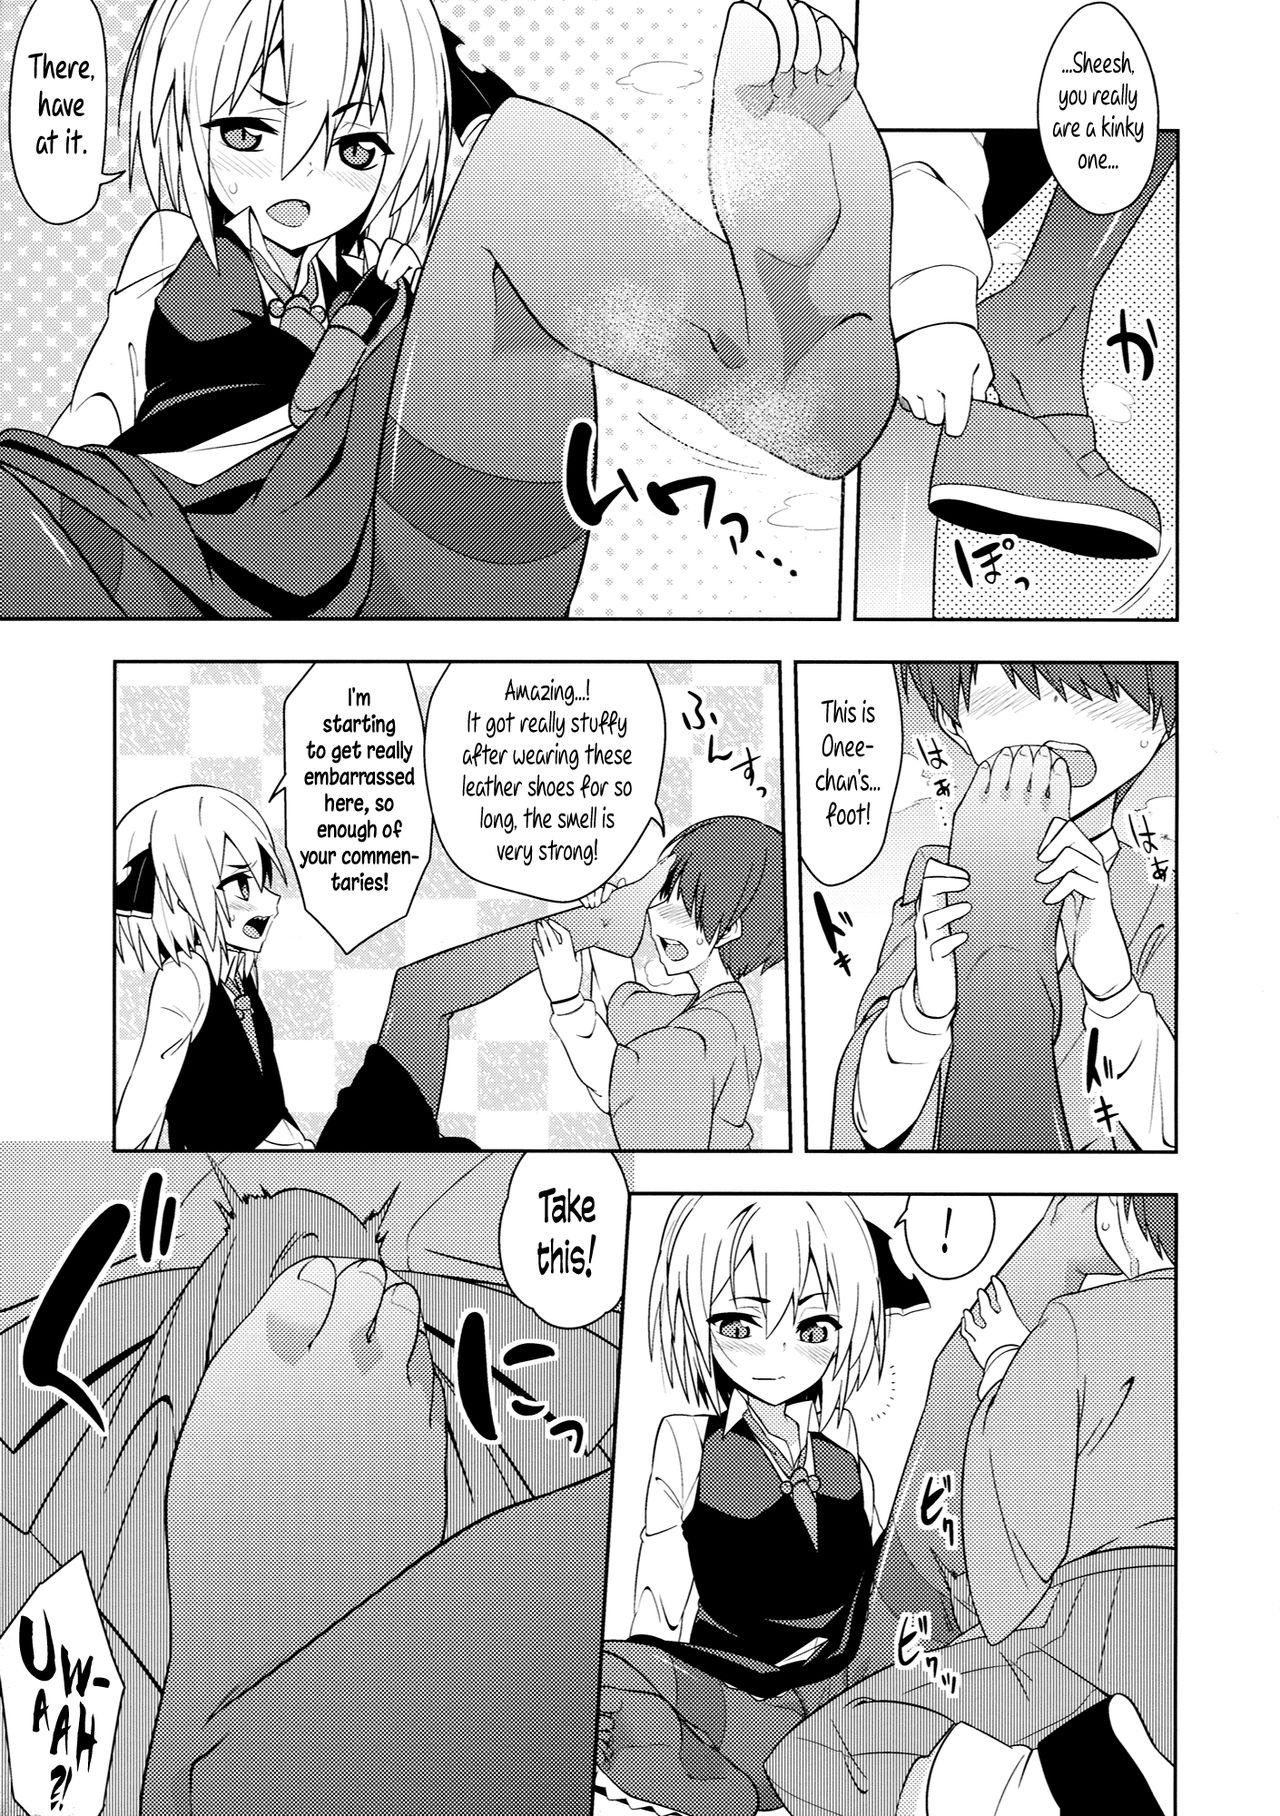 Emo Gay Rumia Aratta？| Have you washed, Rumia? - Touhou project Blowjob Porn - Page 6